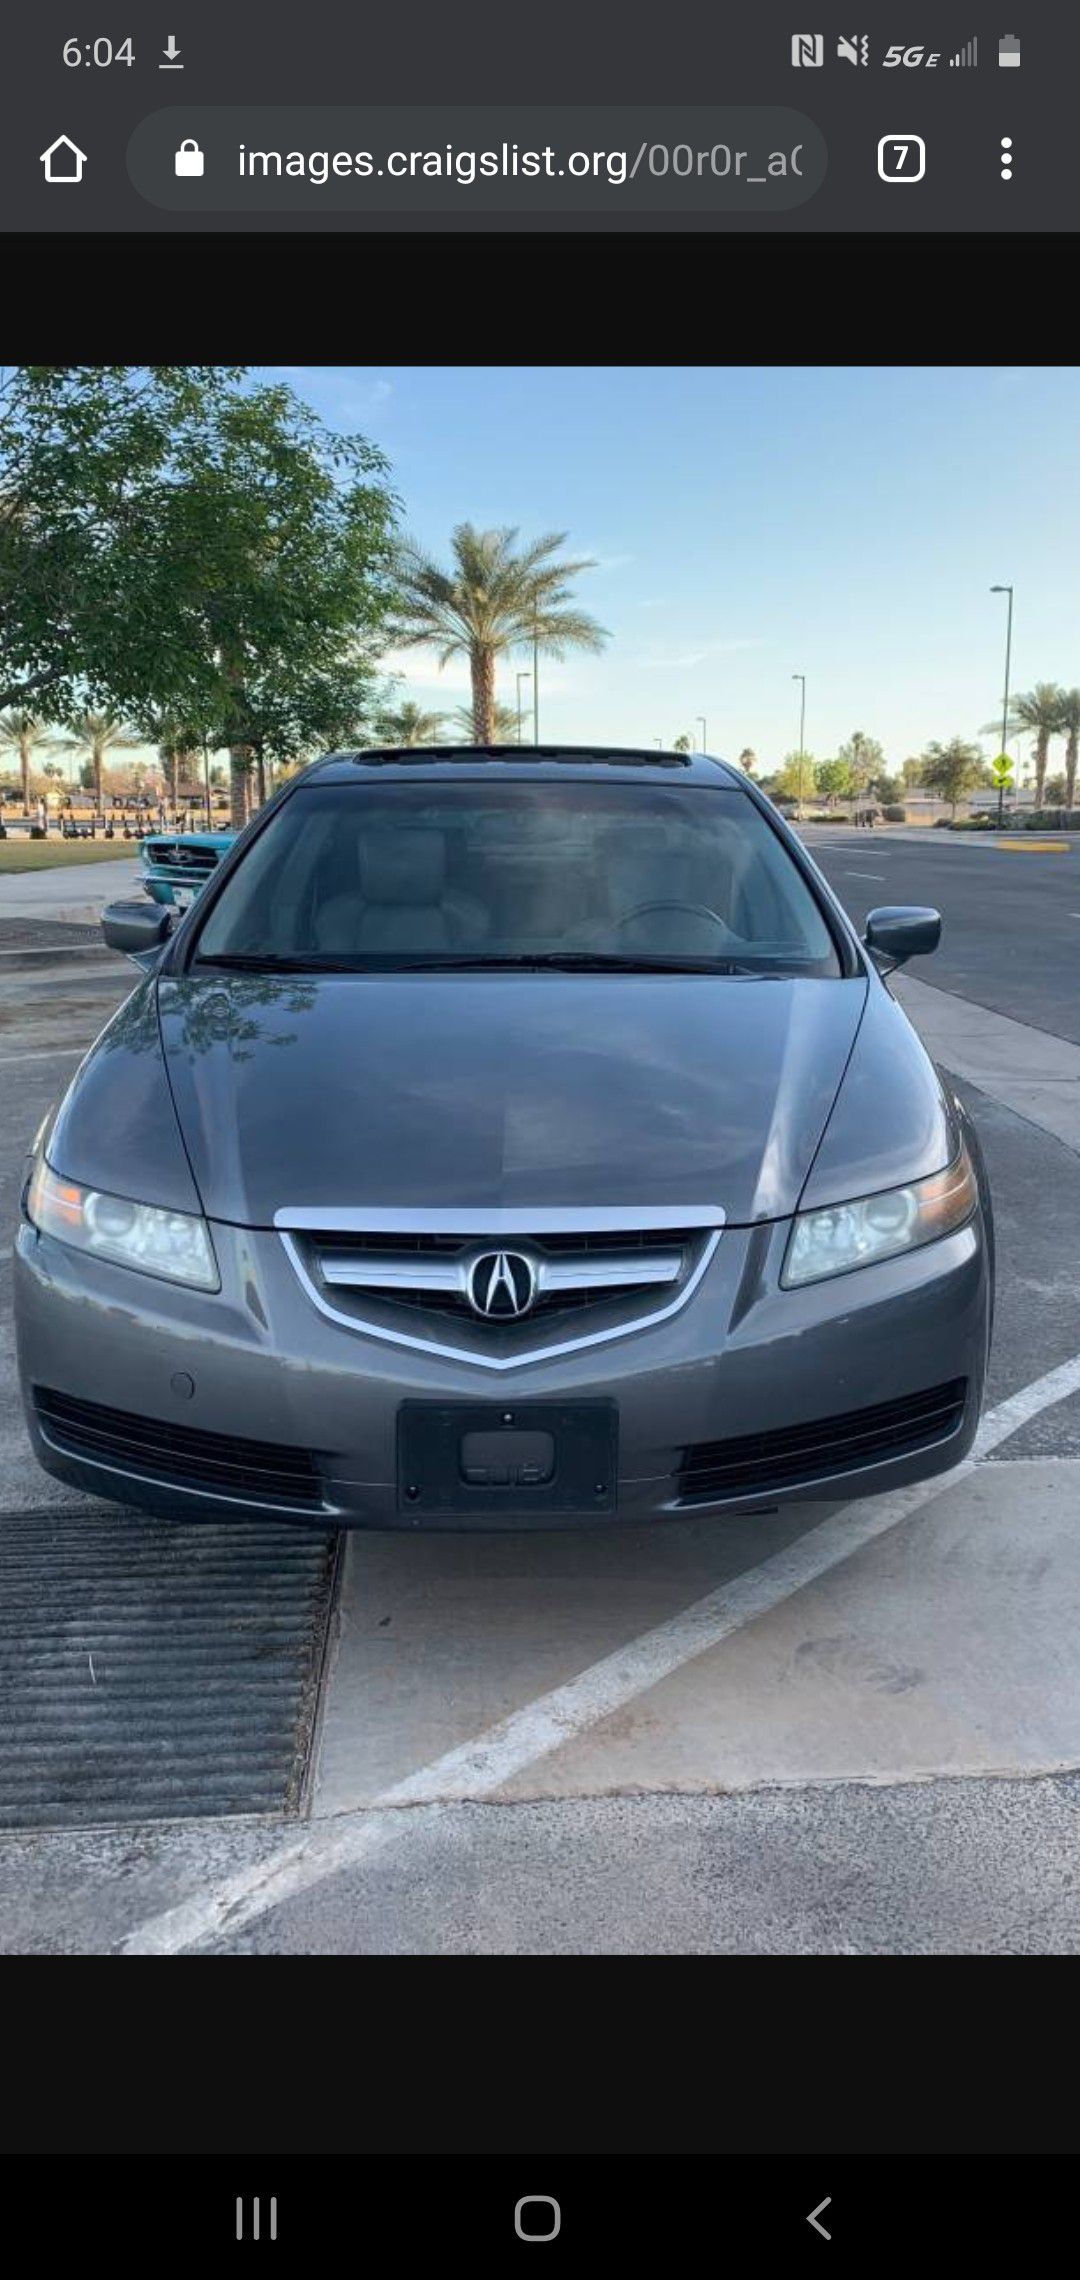 2004 Acura tl front end